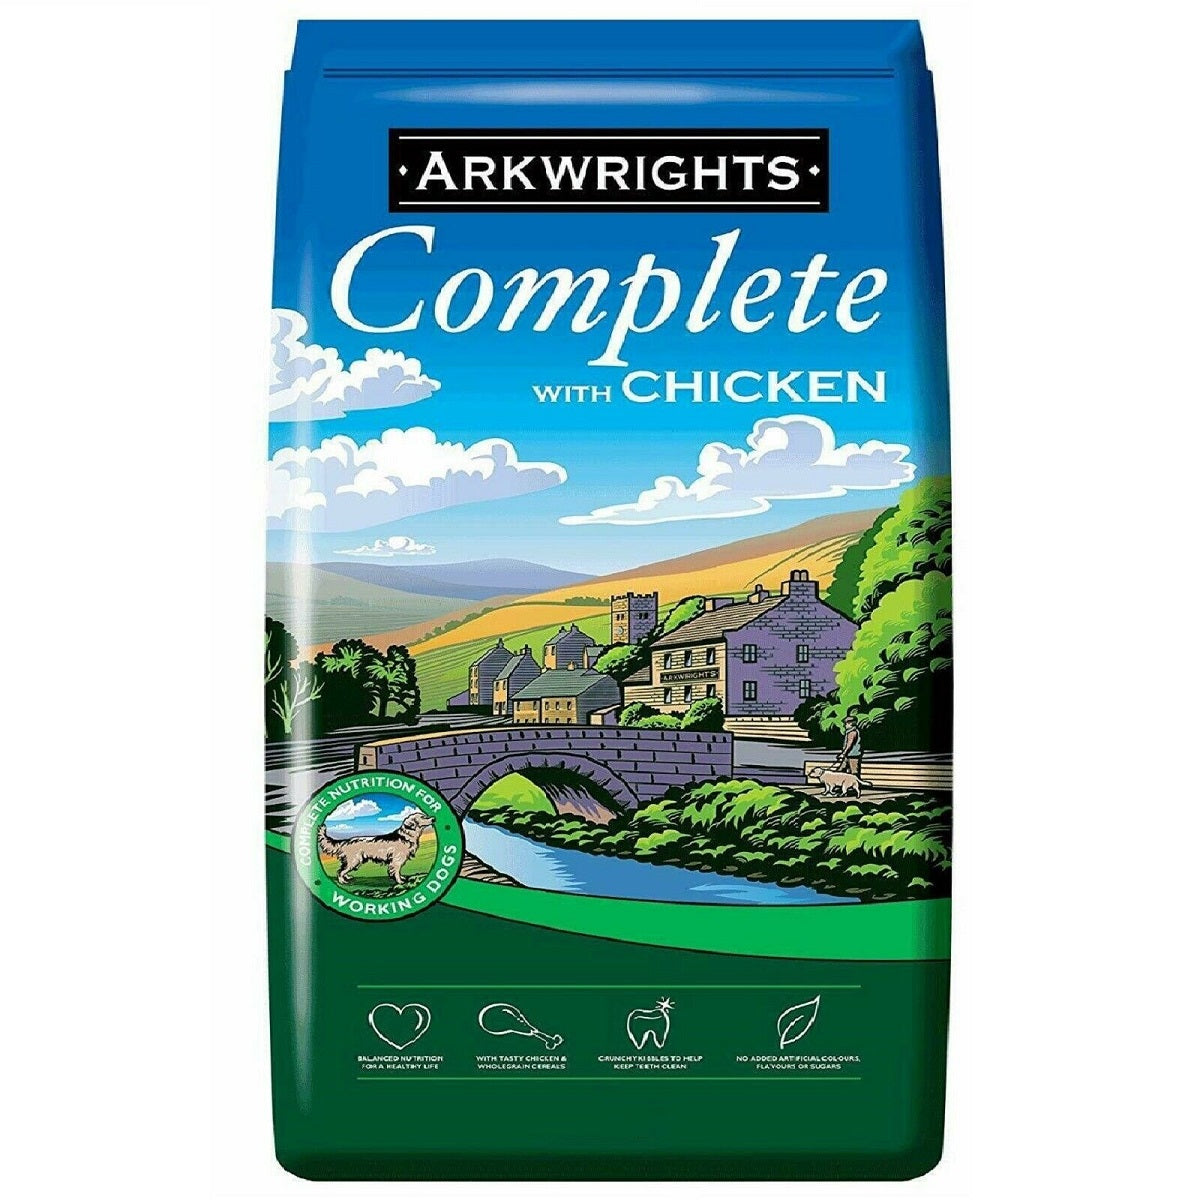 Arkwrights - Complete Chicken